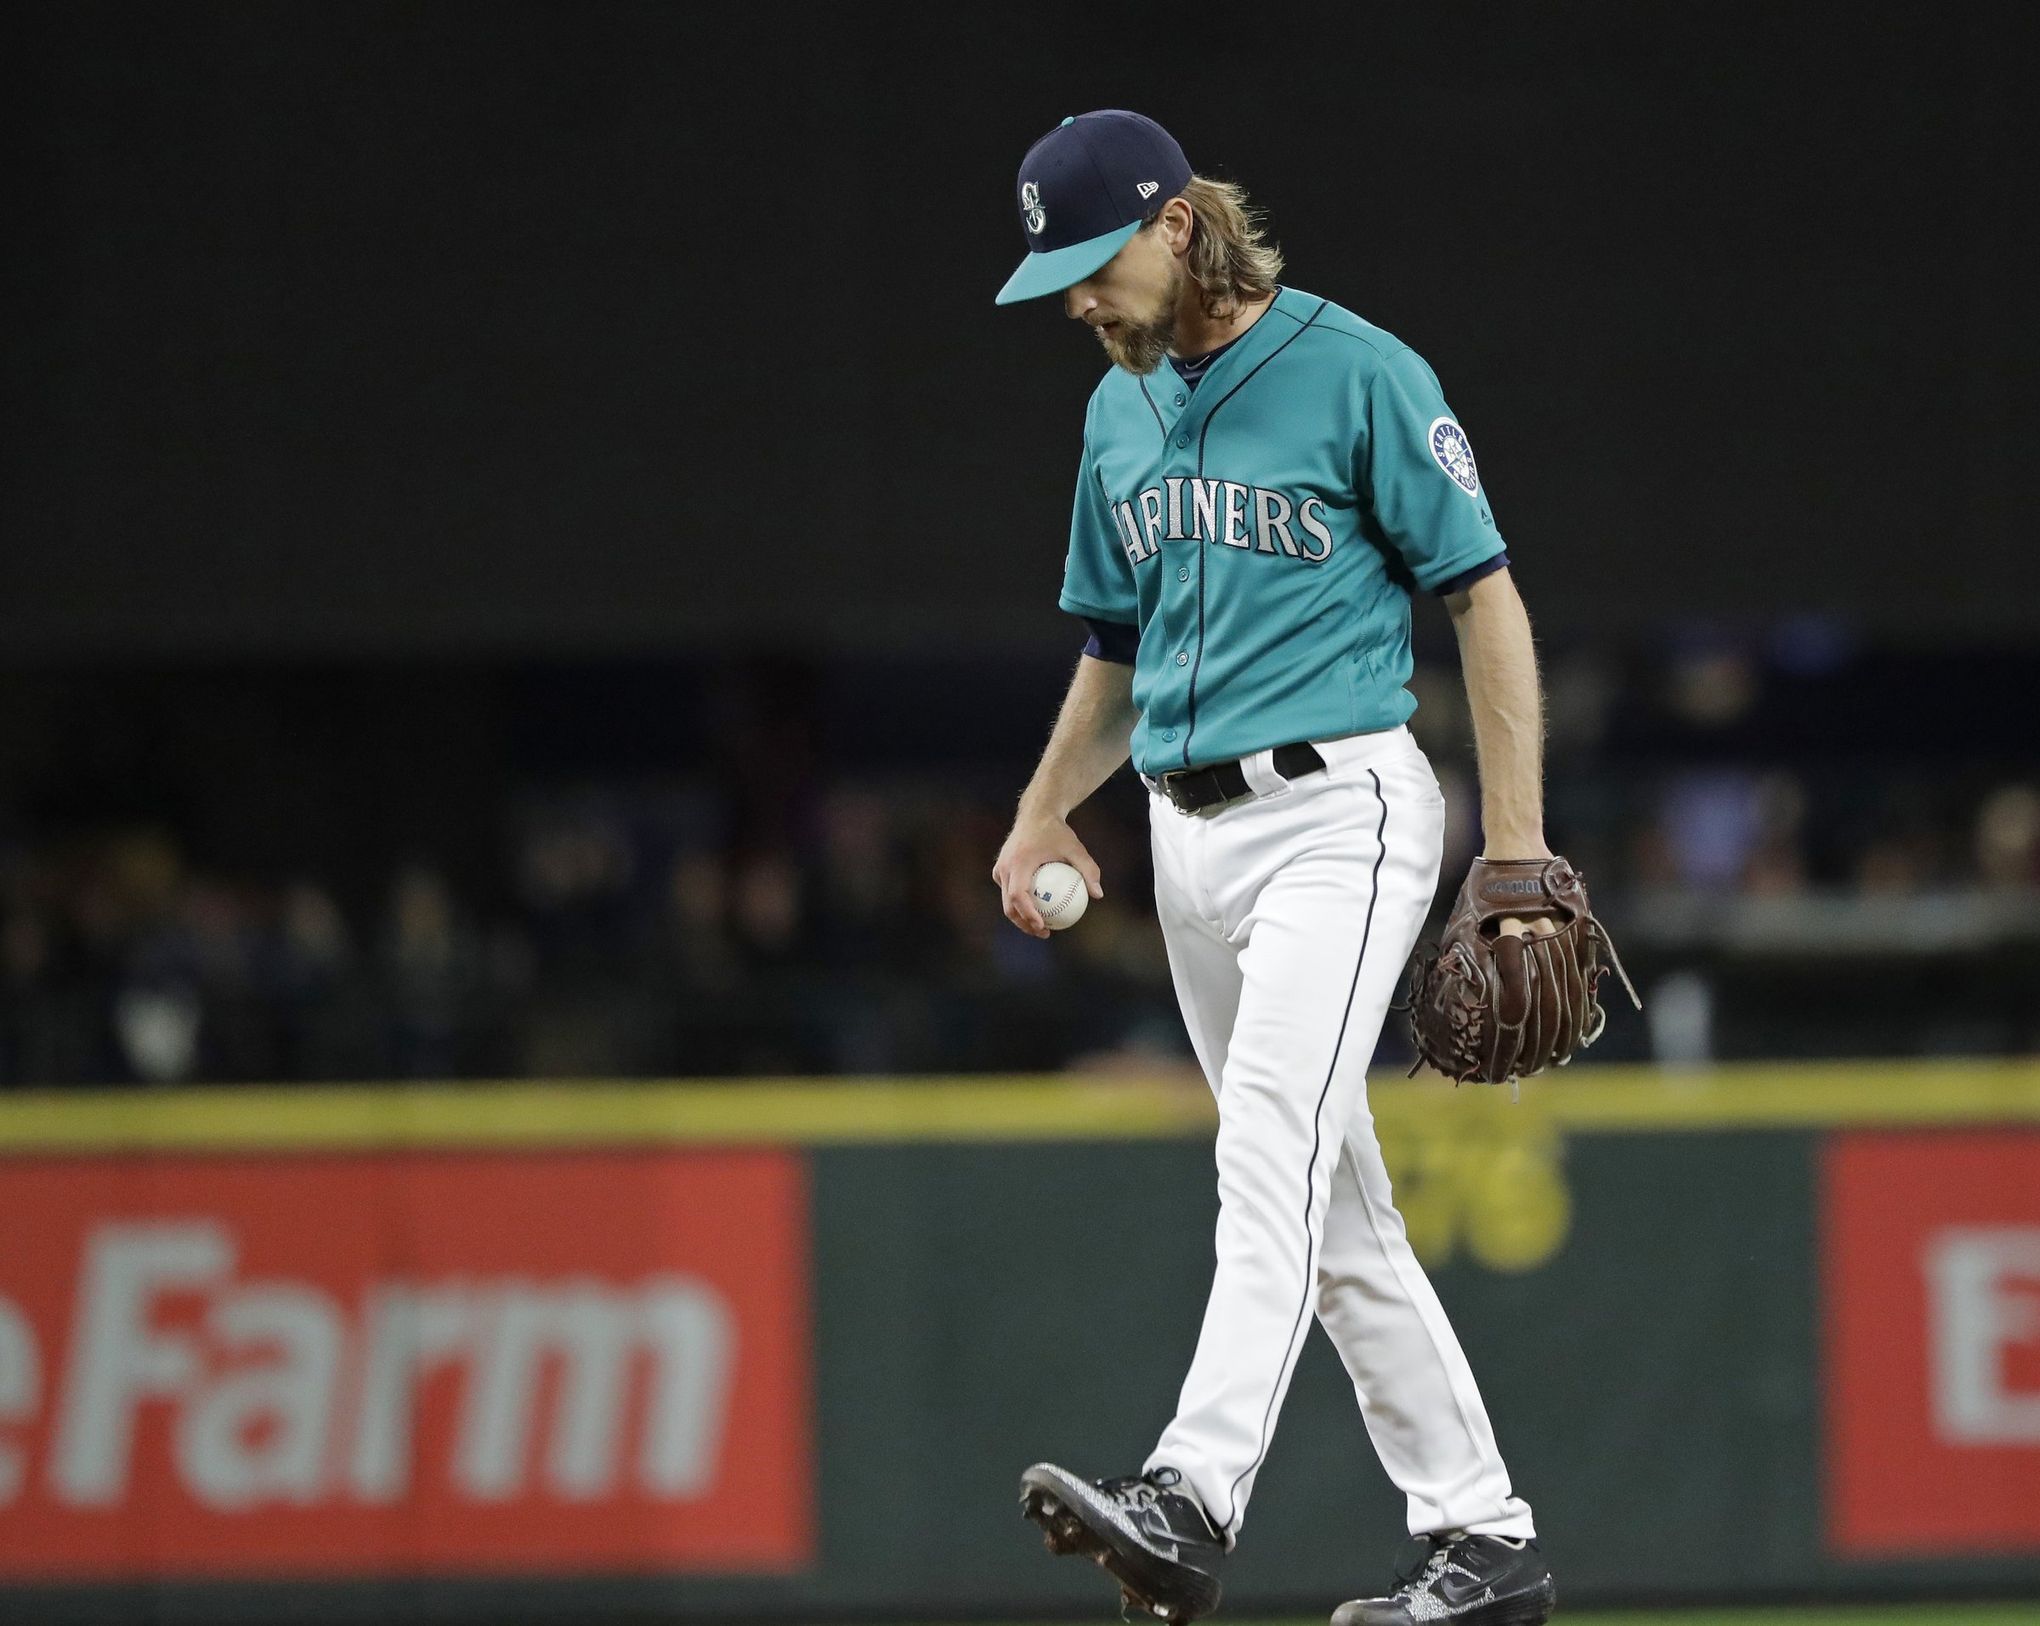 Felix Hernandez of the Seattle Mariners pitches perfect game - Los